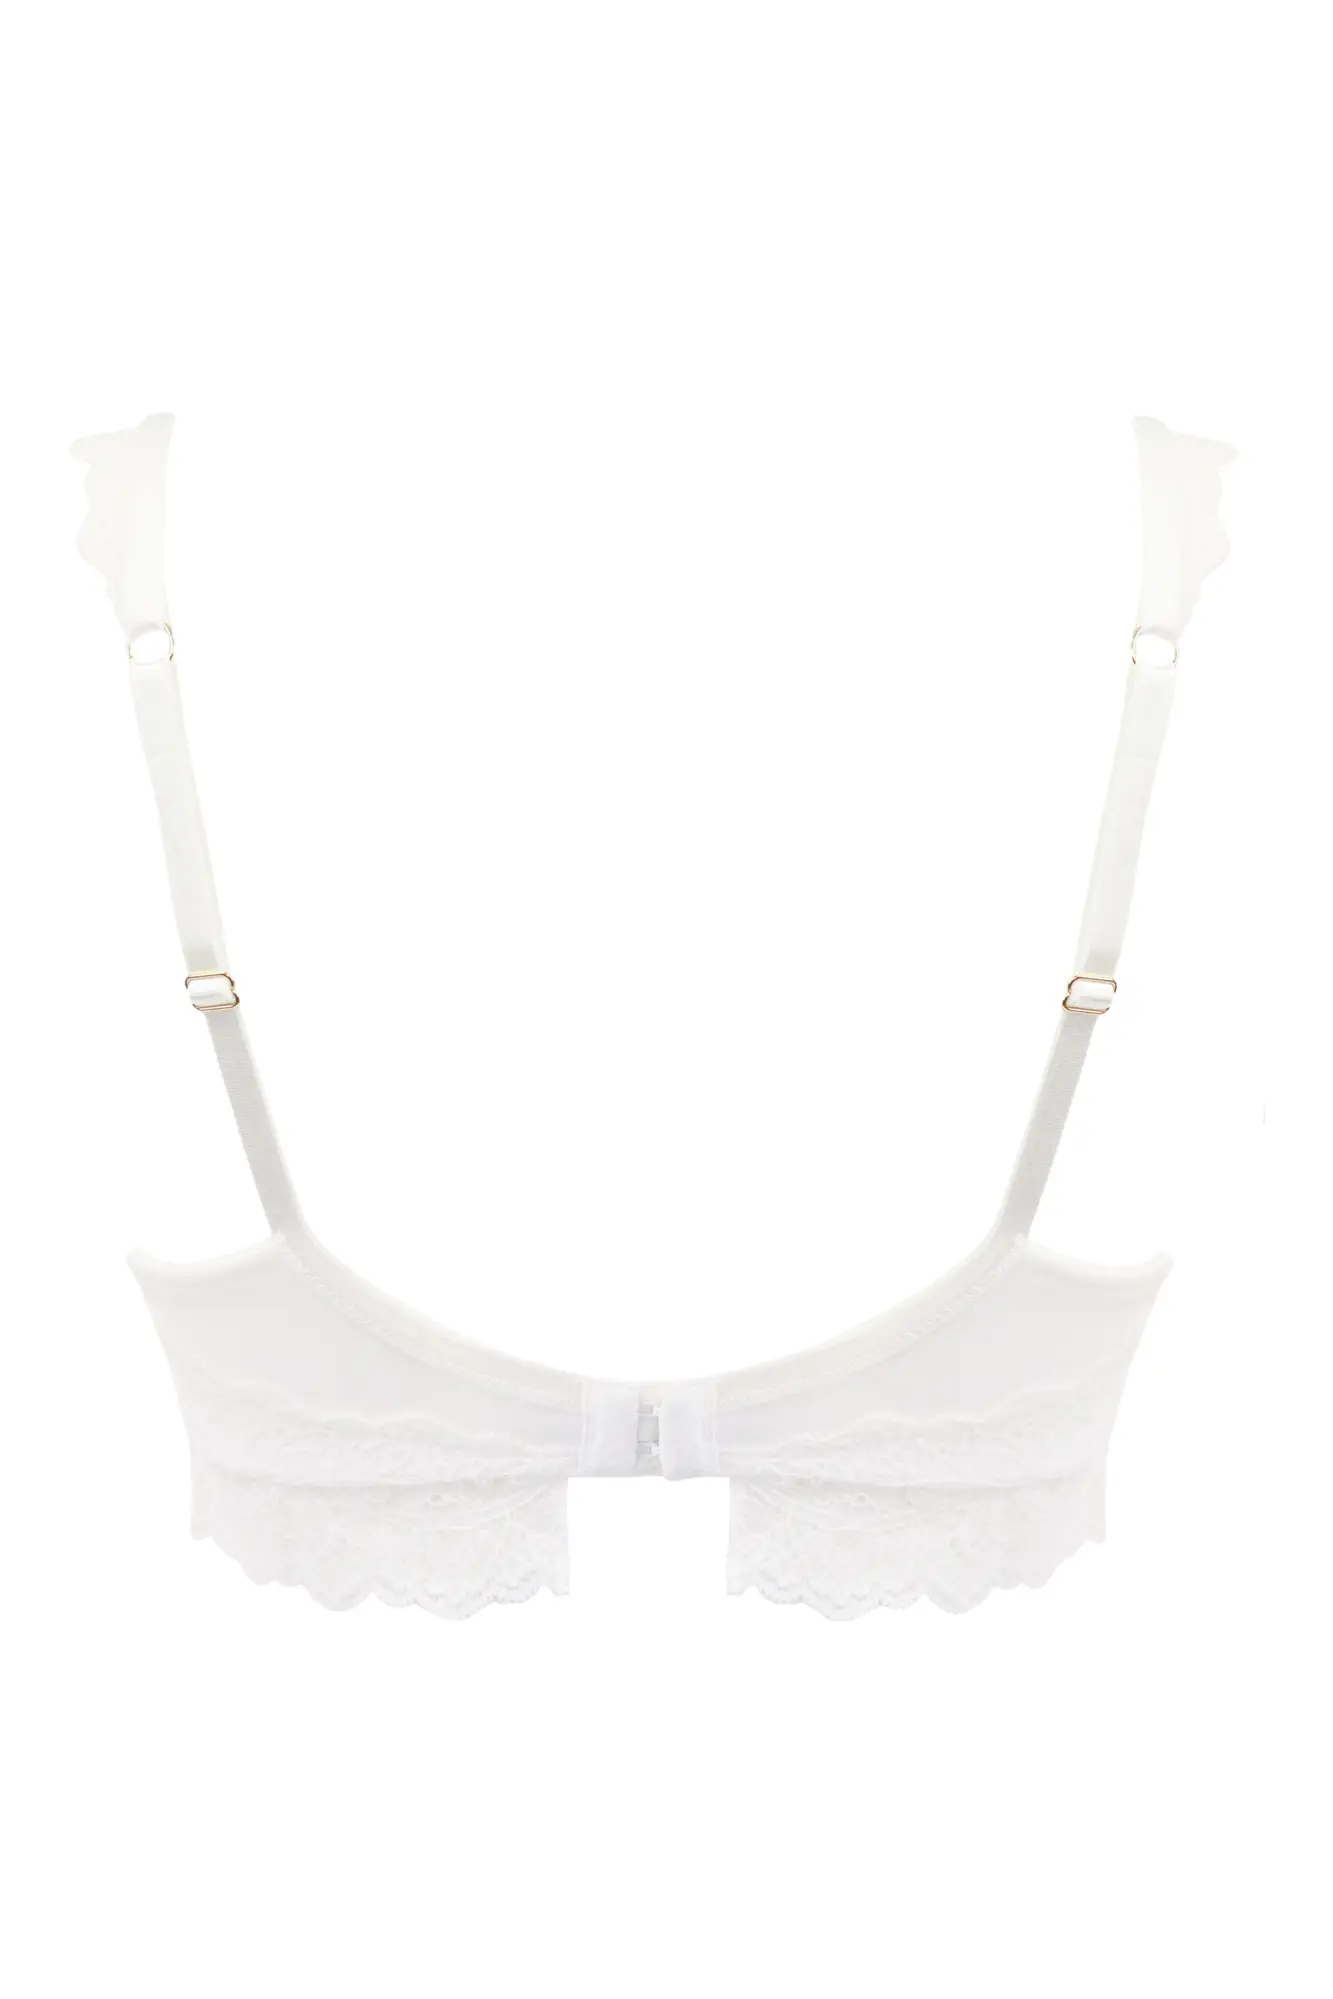 Pour Moi Reflection lace blend padded push up non wired bra in white